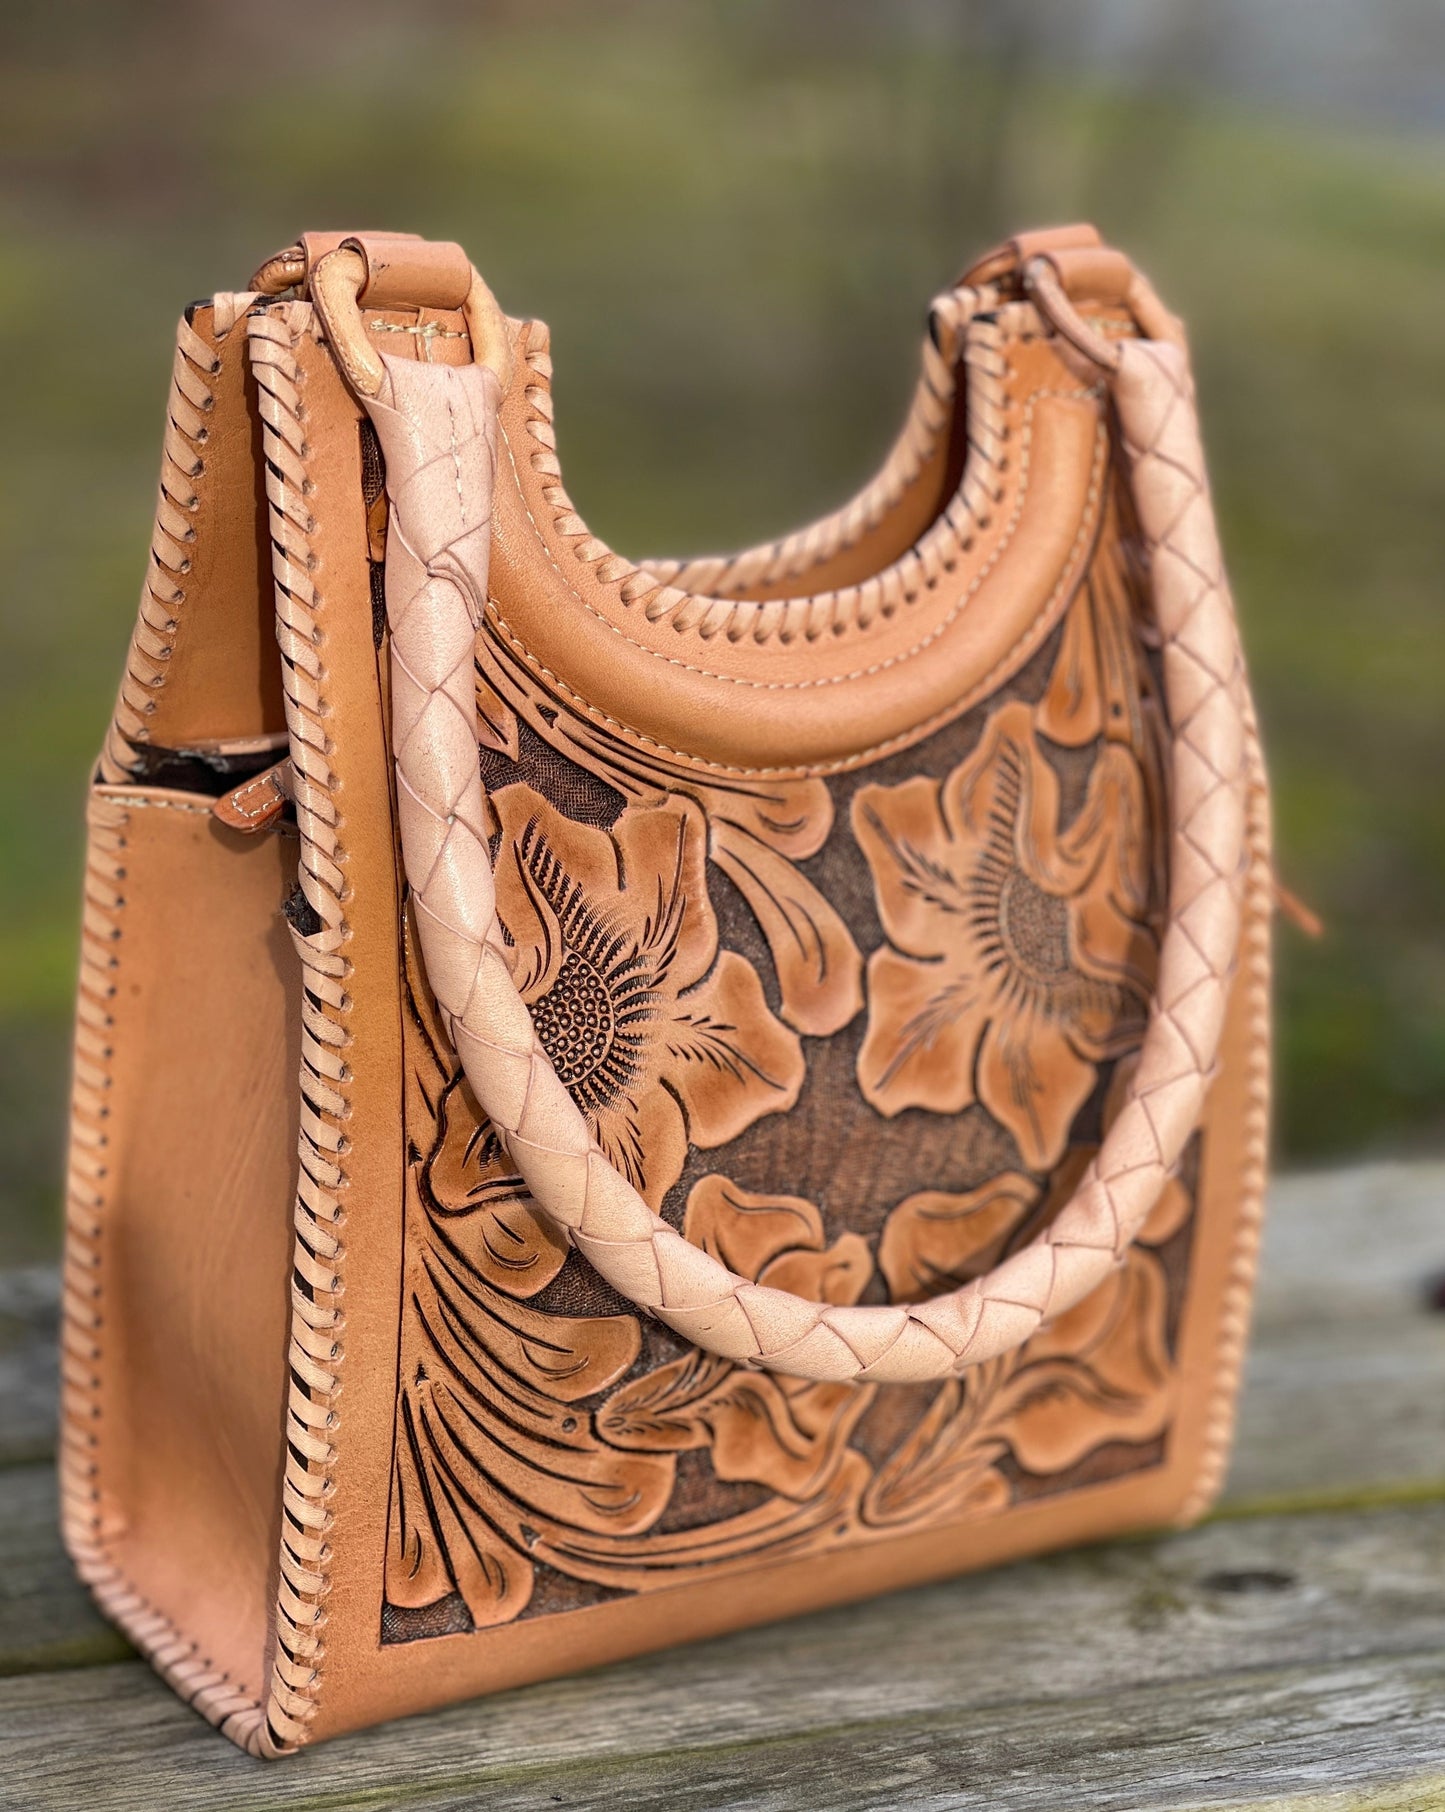 Hand Tooled Leather Hobo Bag "BAALY" by ALLE - ALLE Handbags